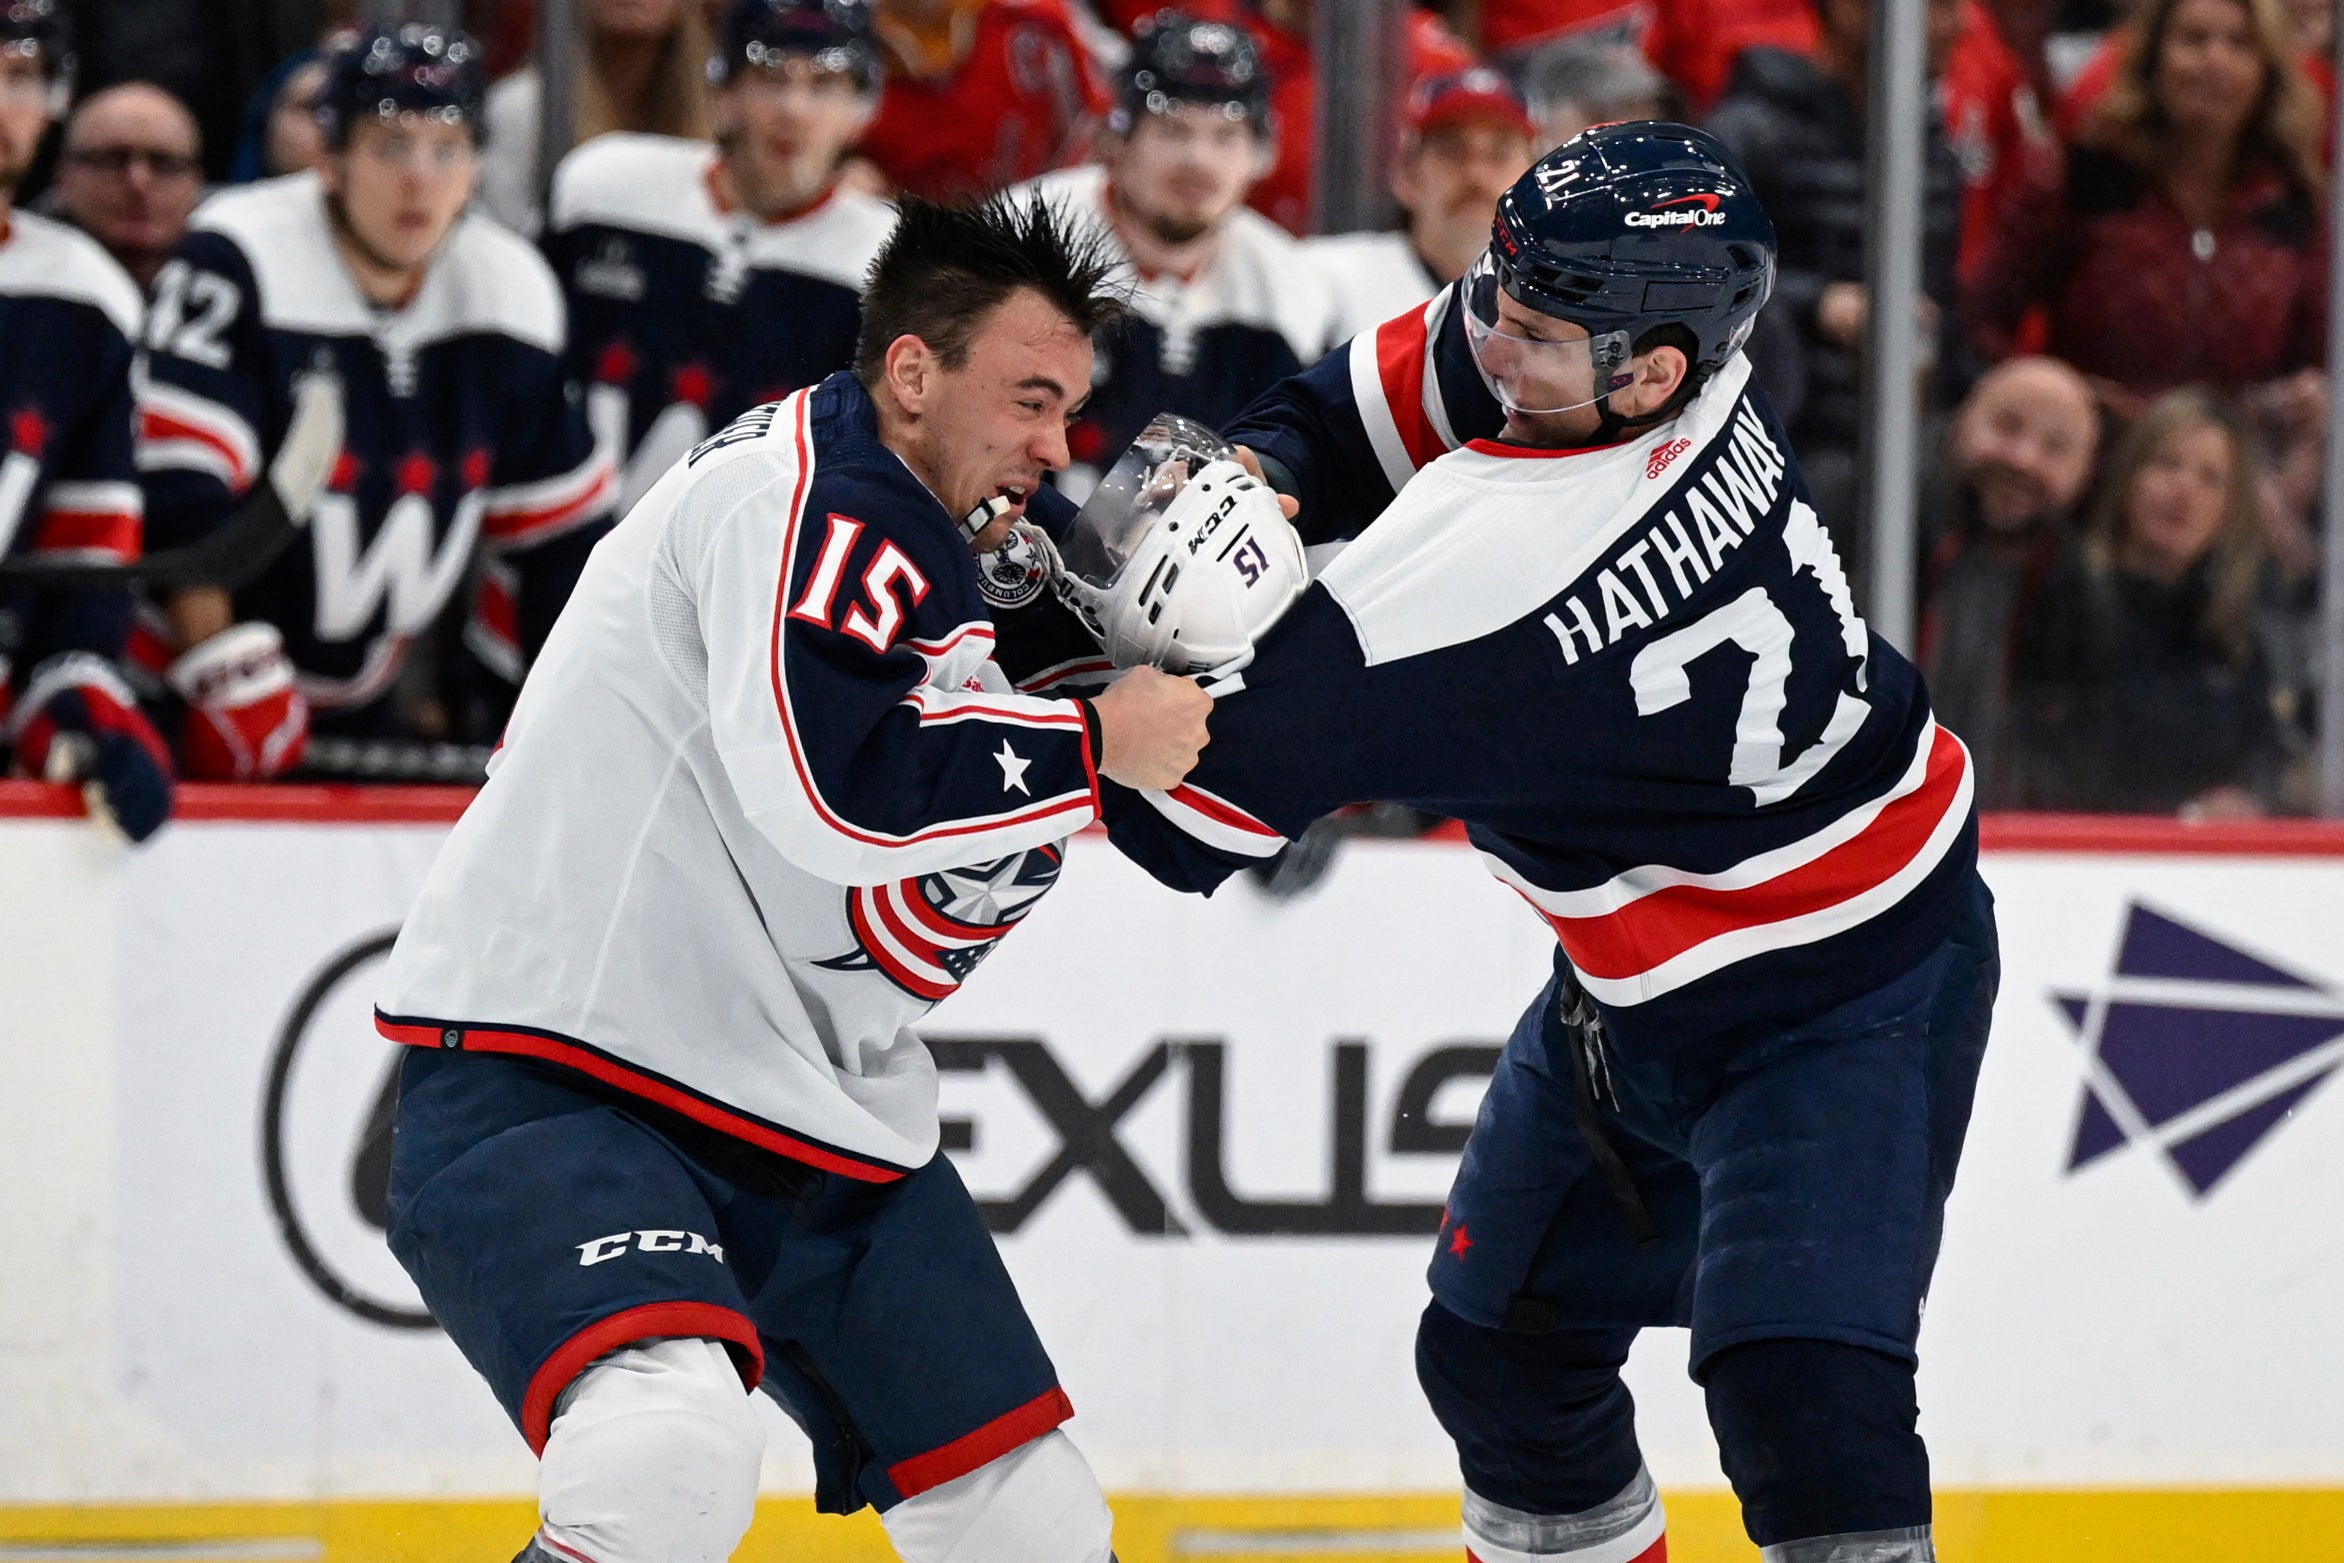 Columbus Blue Jackets defenseman Gavin Bayreuther (15) and Washington Capitals right wing Garnet Hathaway (21) fight during the first period of an NHL hockey game, Sunday, Jan. 8, 2023, in Washington.